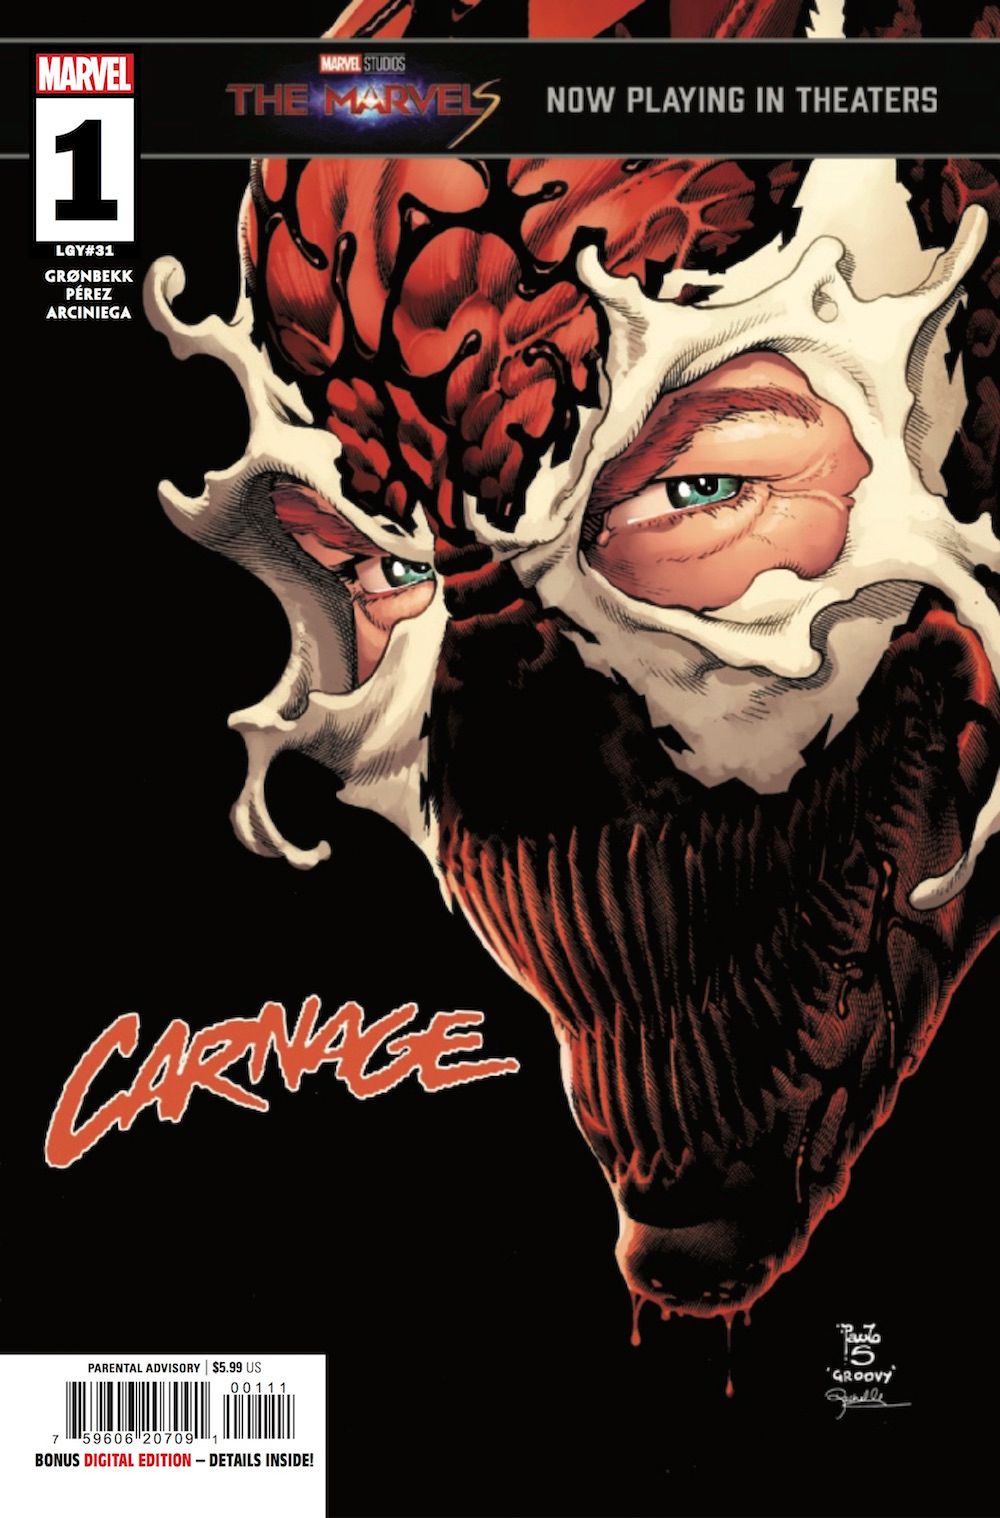 The cover of Carnage #1, a close up of Cletus Kasady's face fusing with the Carnage Symbiote.